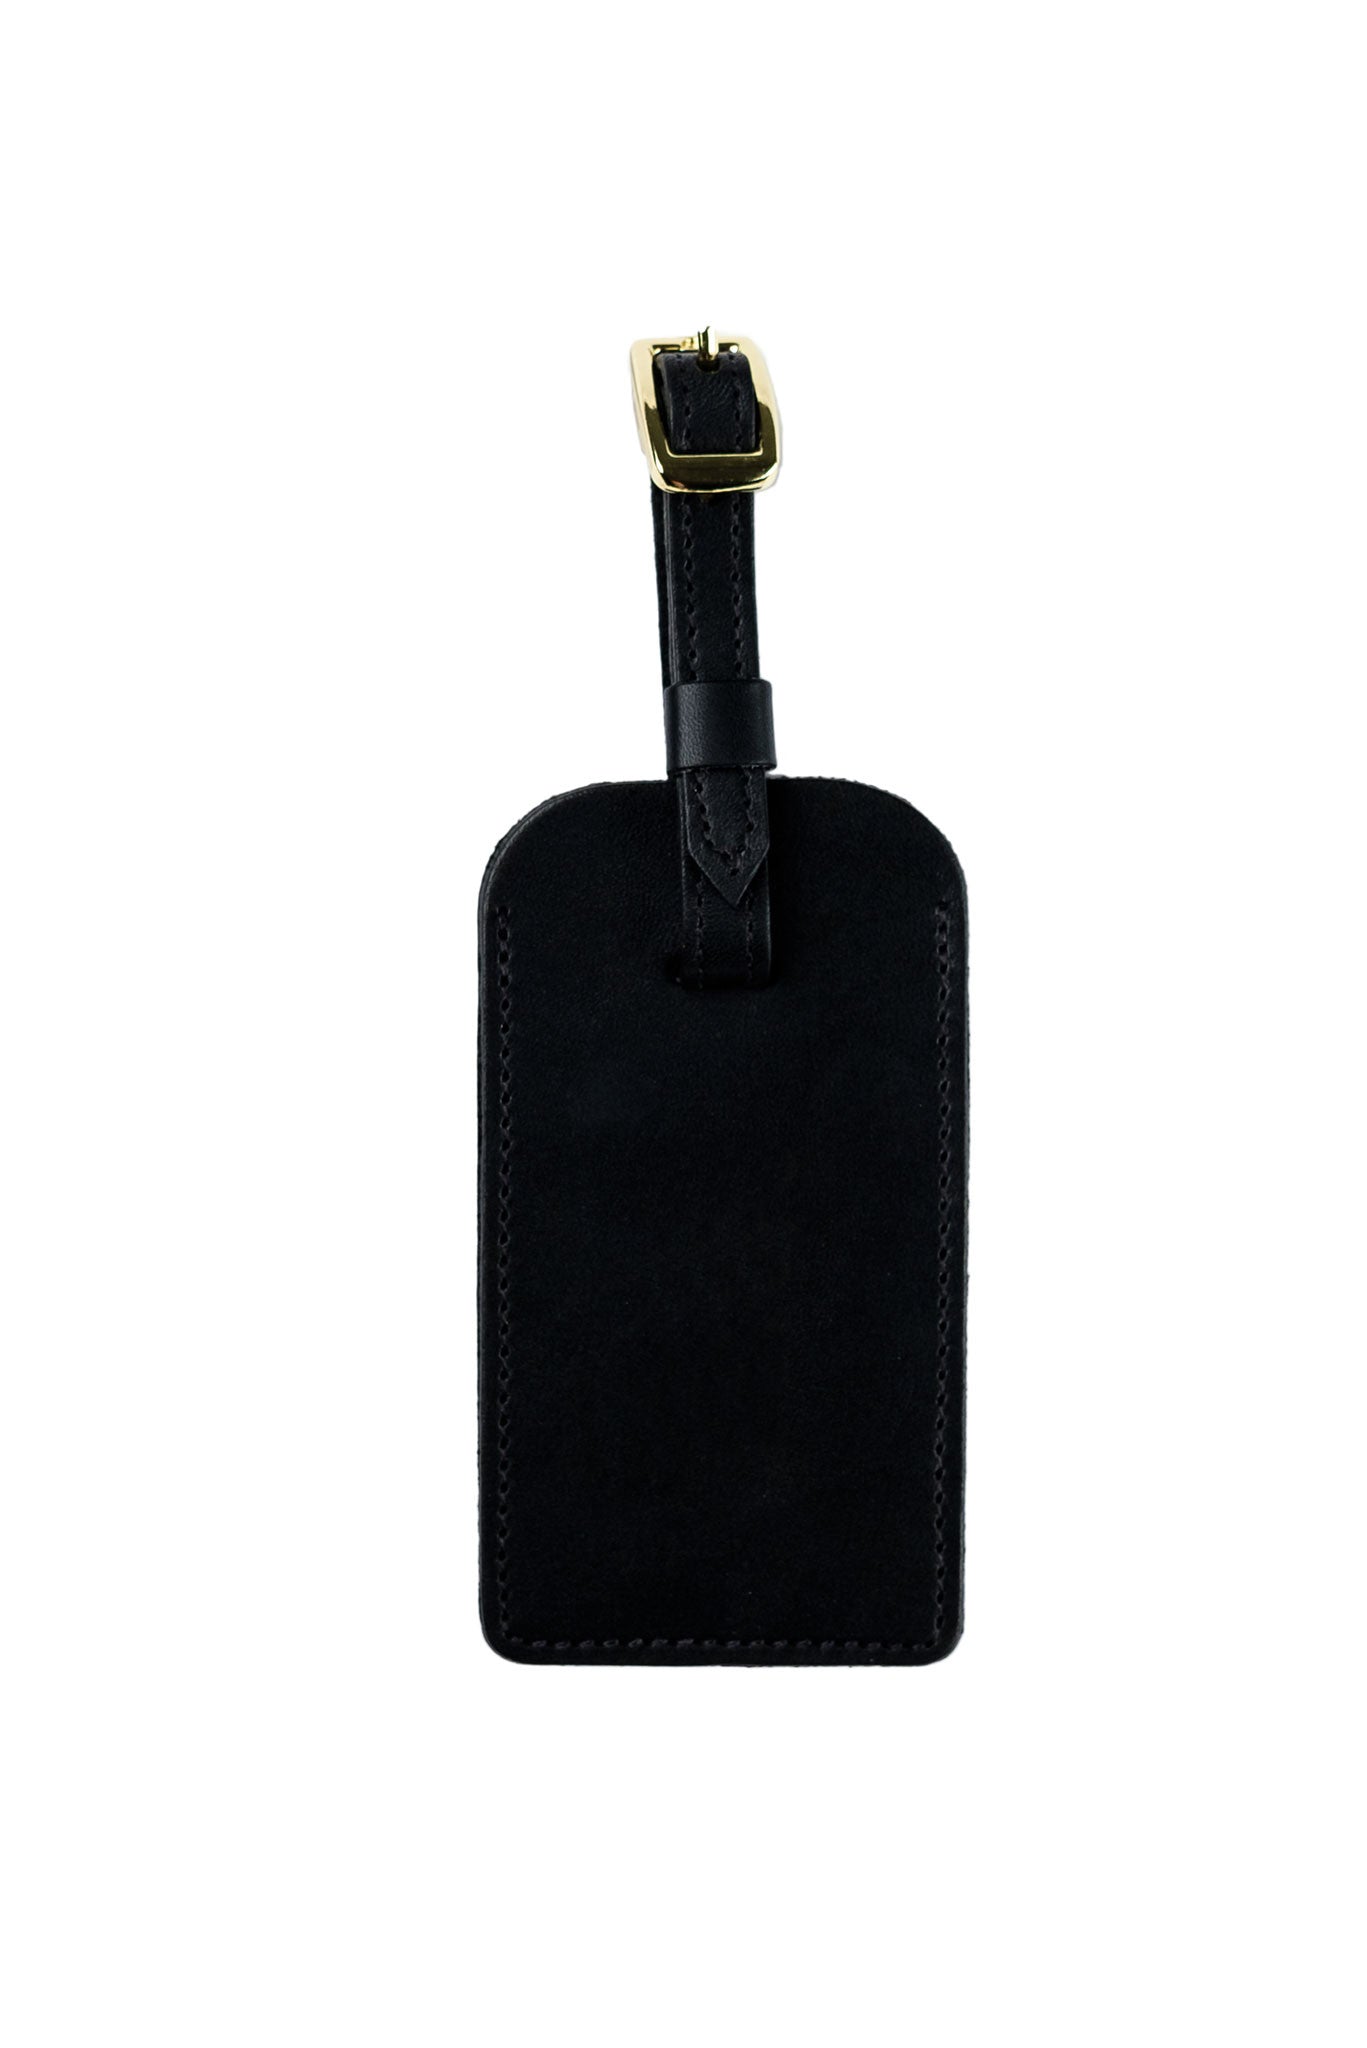 FOTO | Personalized Black Leather Luggage Tag | FOTO